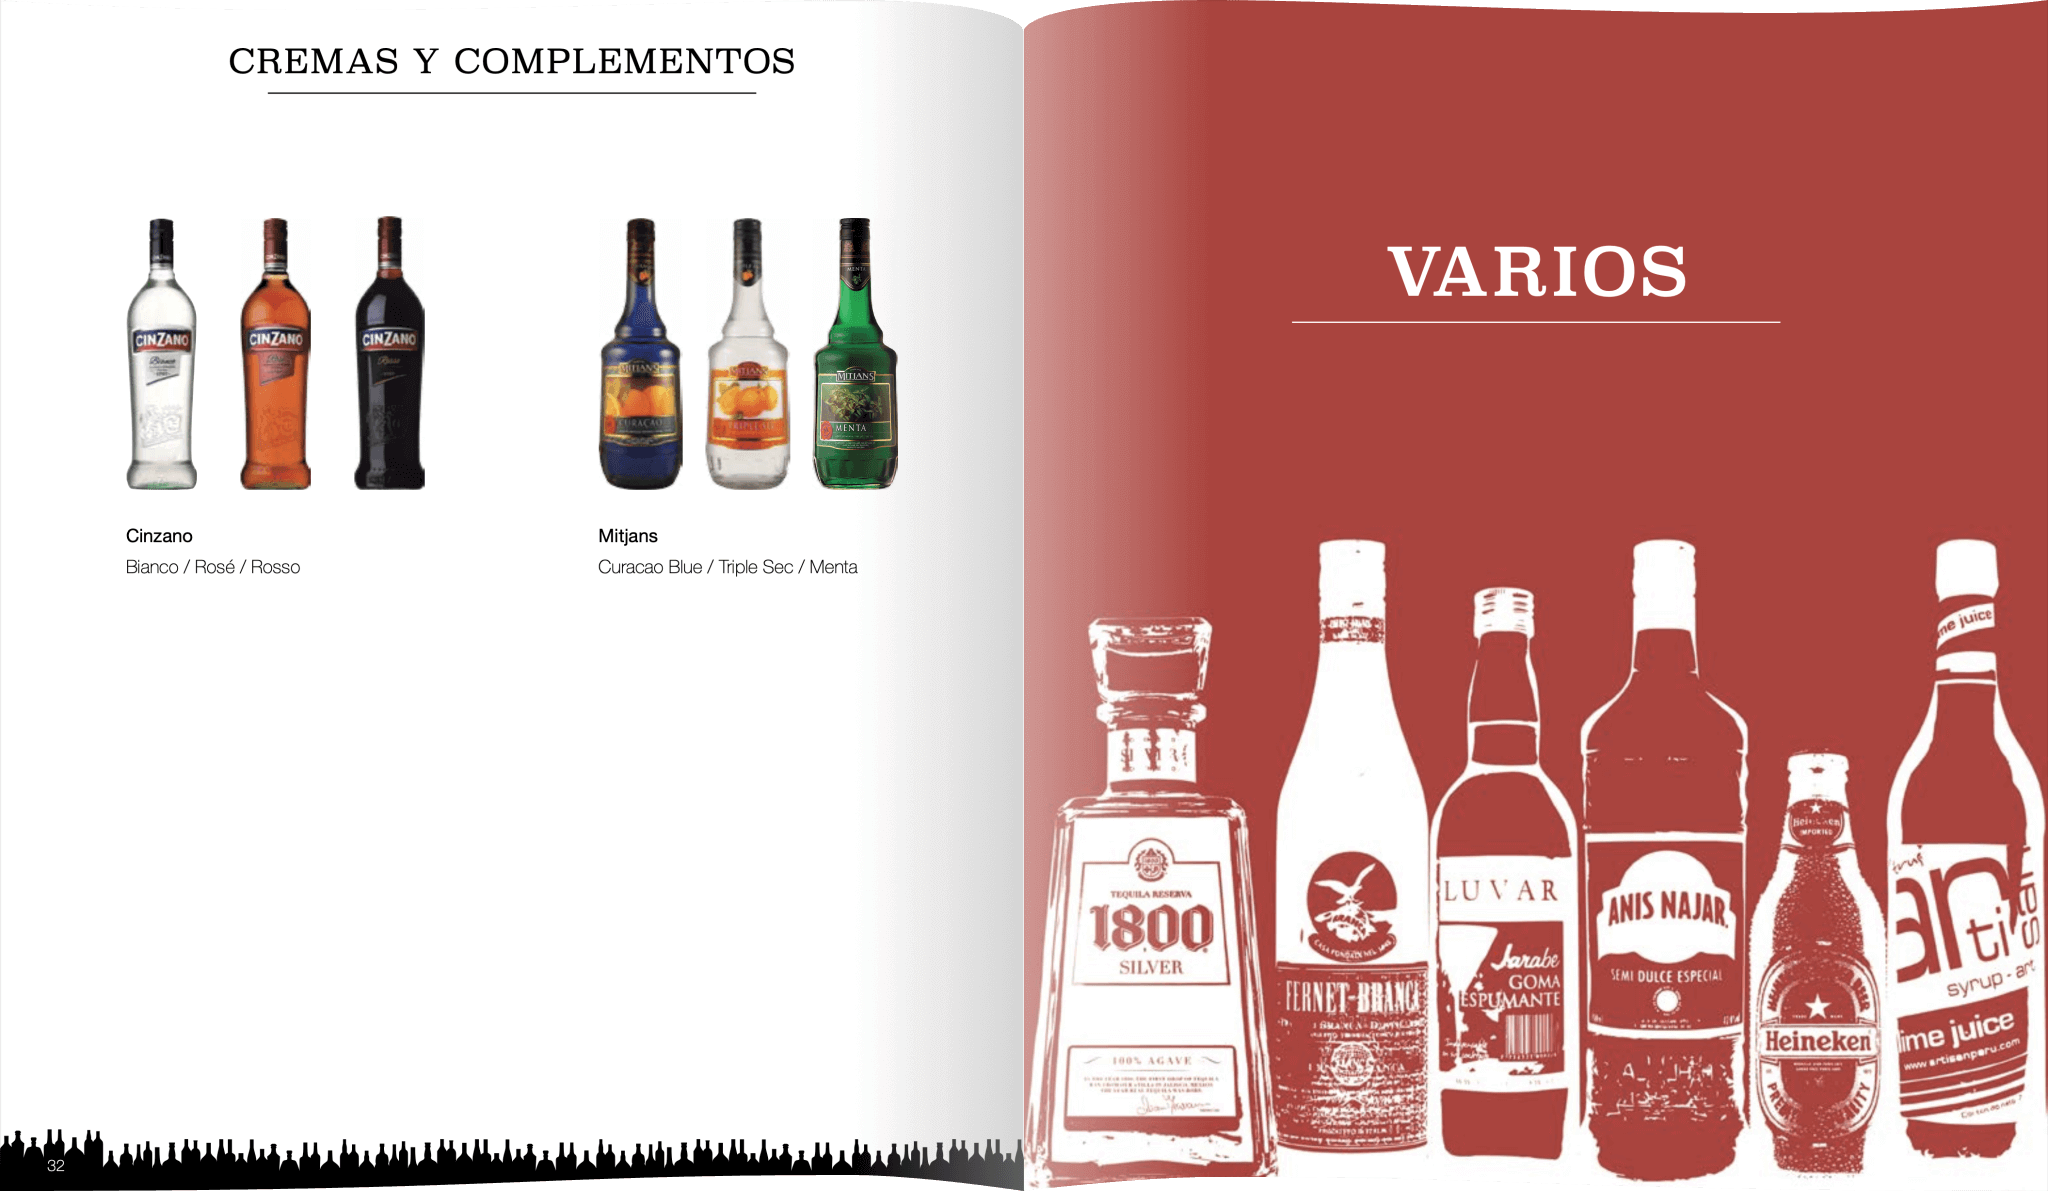 A page of the catalogue featuring some of the bottles we shot.